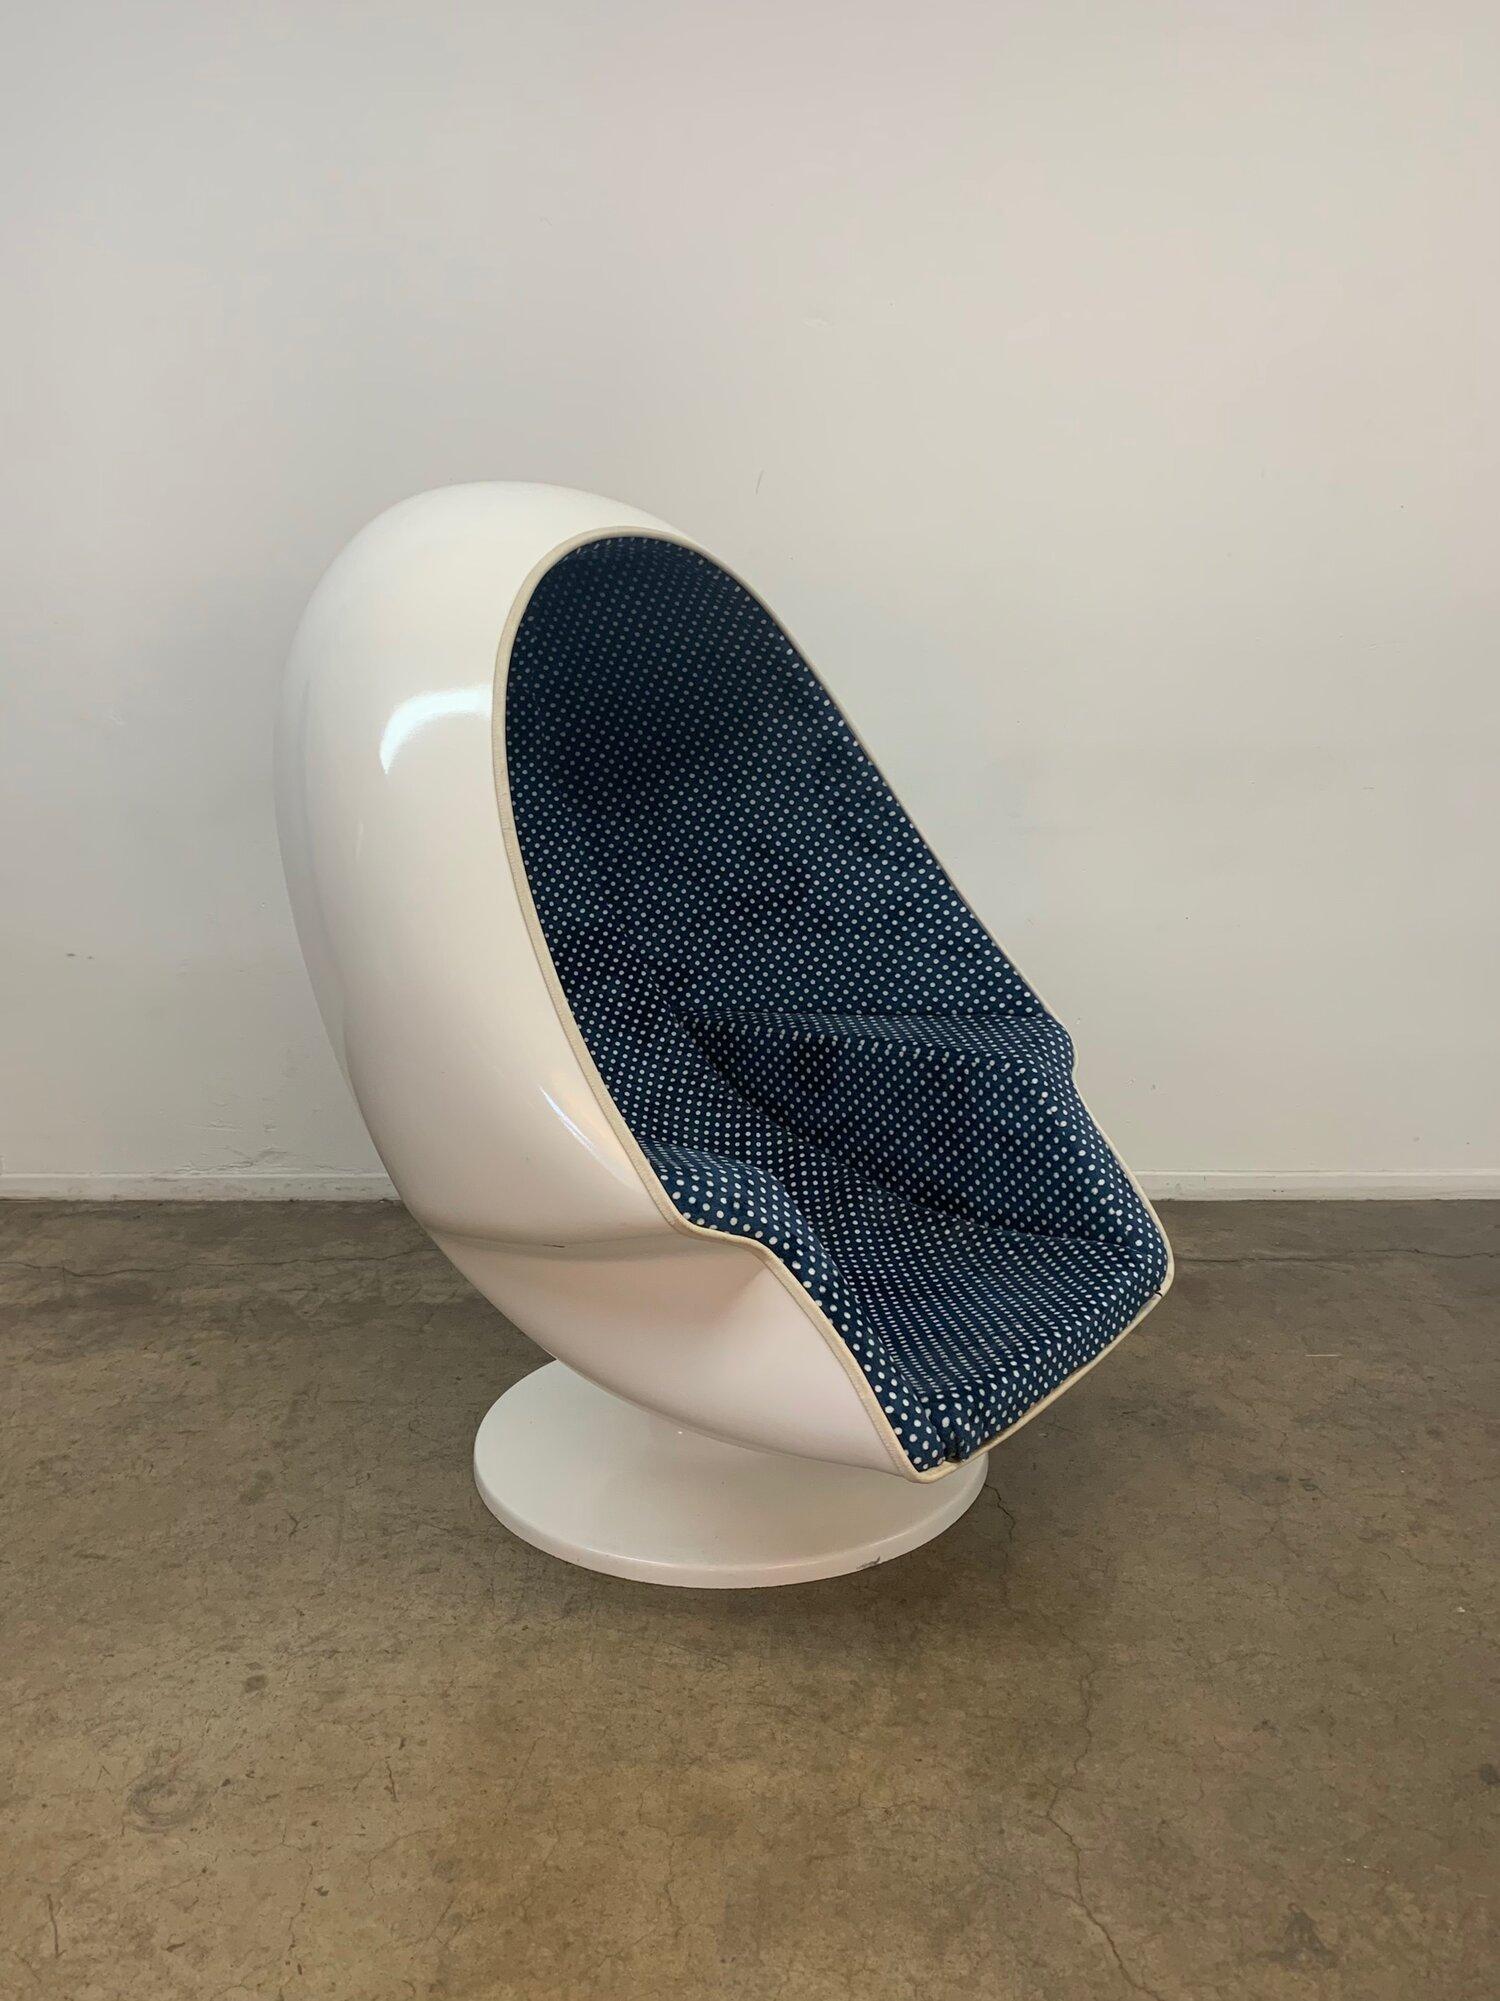 Fabric Vintage Space-Age Egg Chair, Original Upholstery